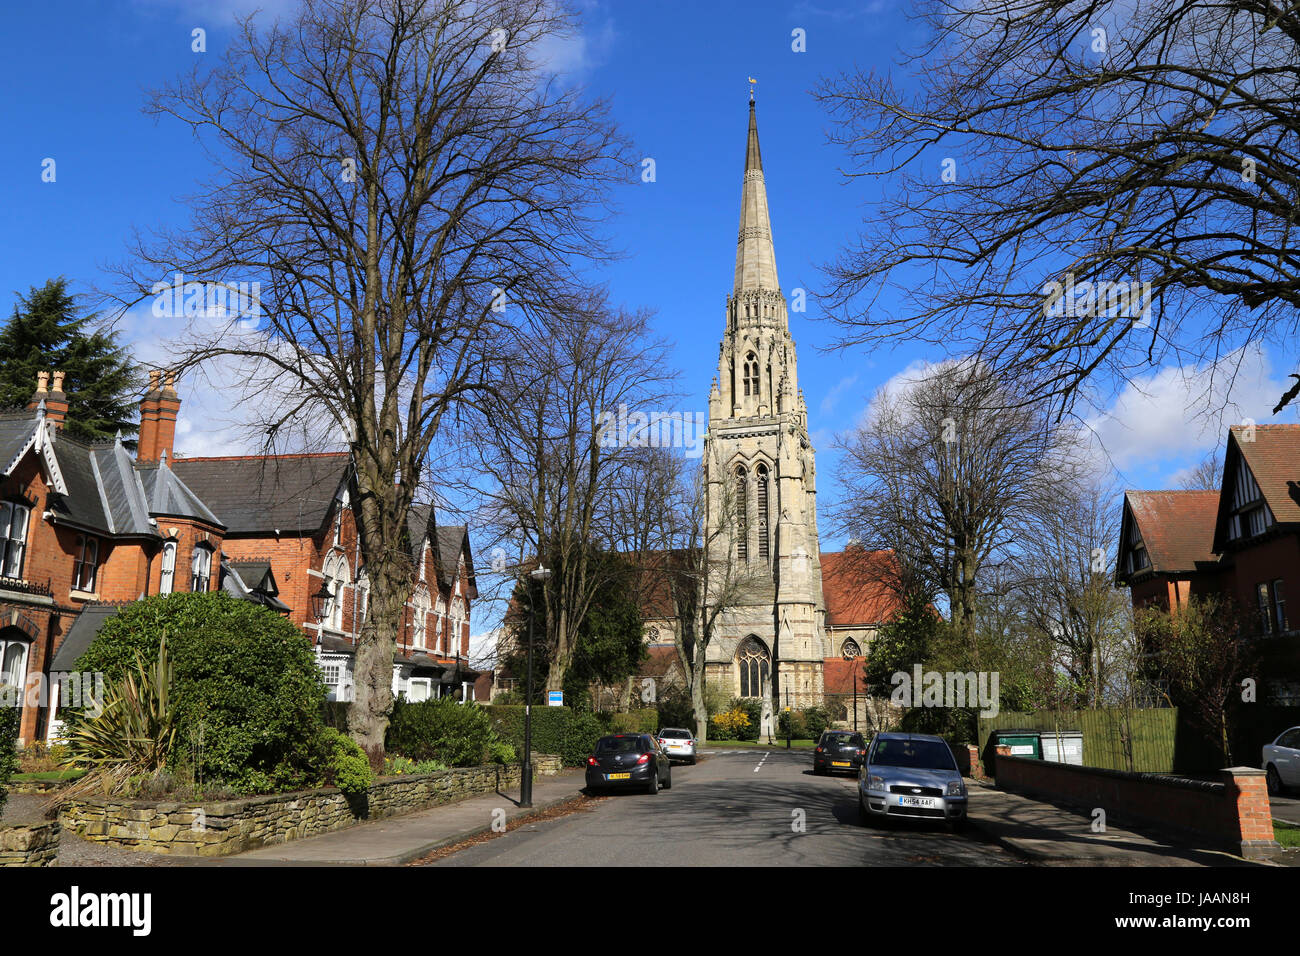 A view of St. Augustine's church, a listed, historic building located in Edgbaston, Birmingham, UK. Stock Photo